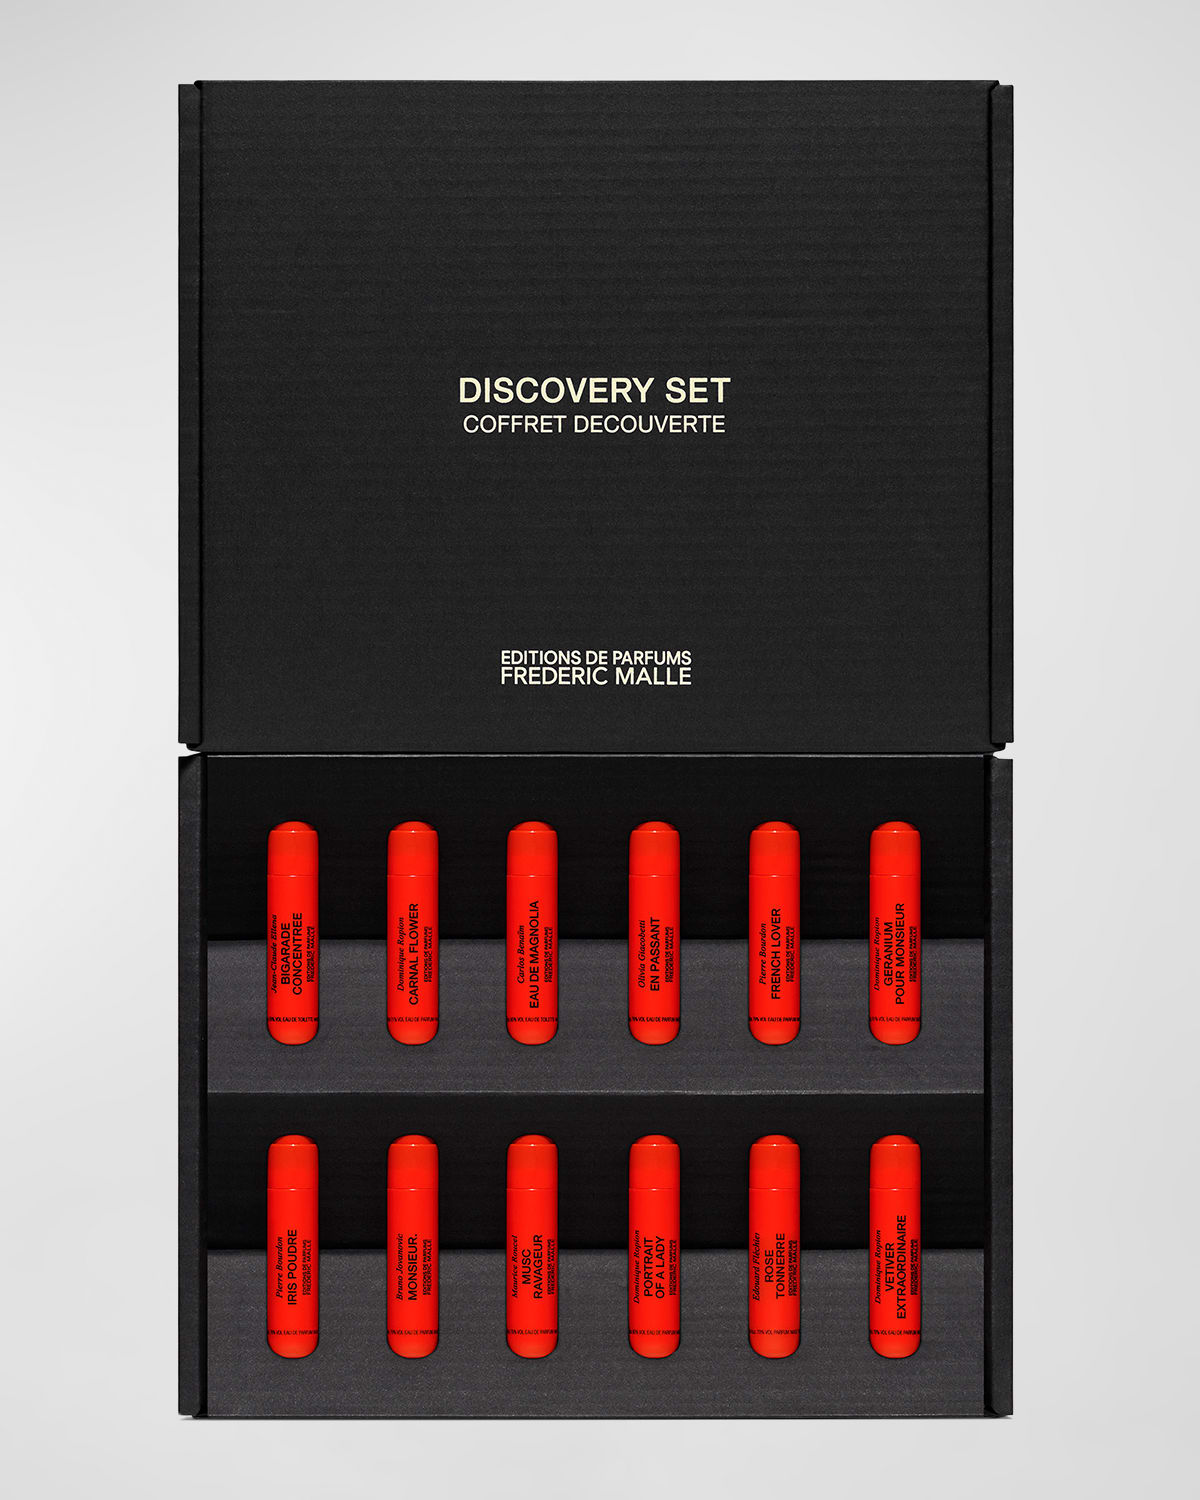 Shop Editions De Parfums Frederic Malle Fragrance Discovery Set, 12 X 1.2 ml